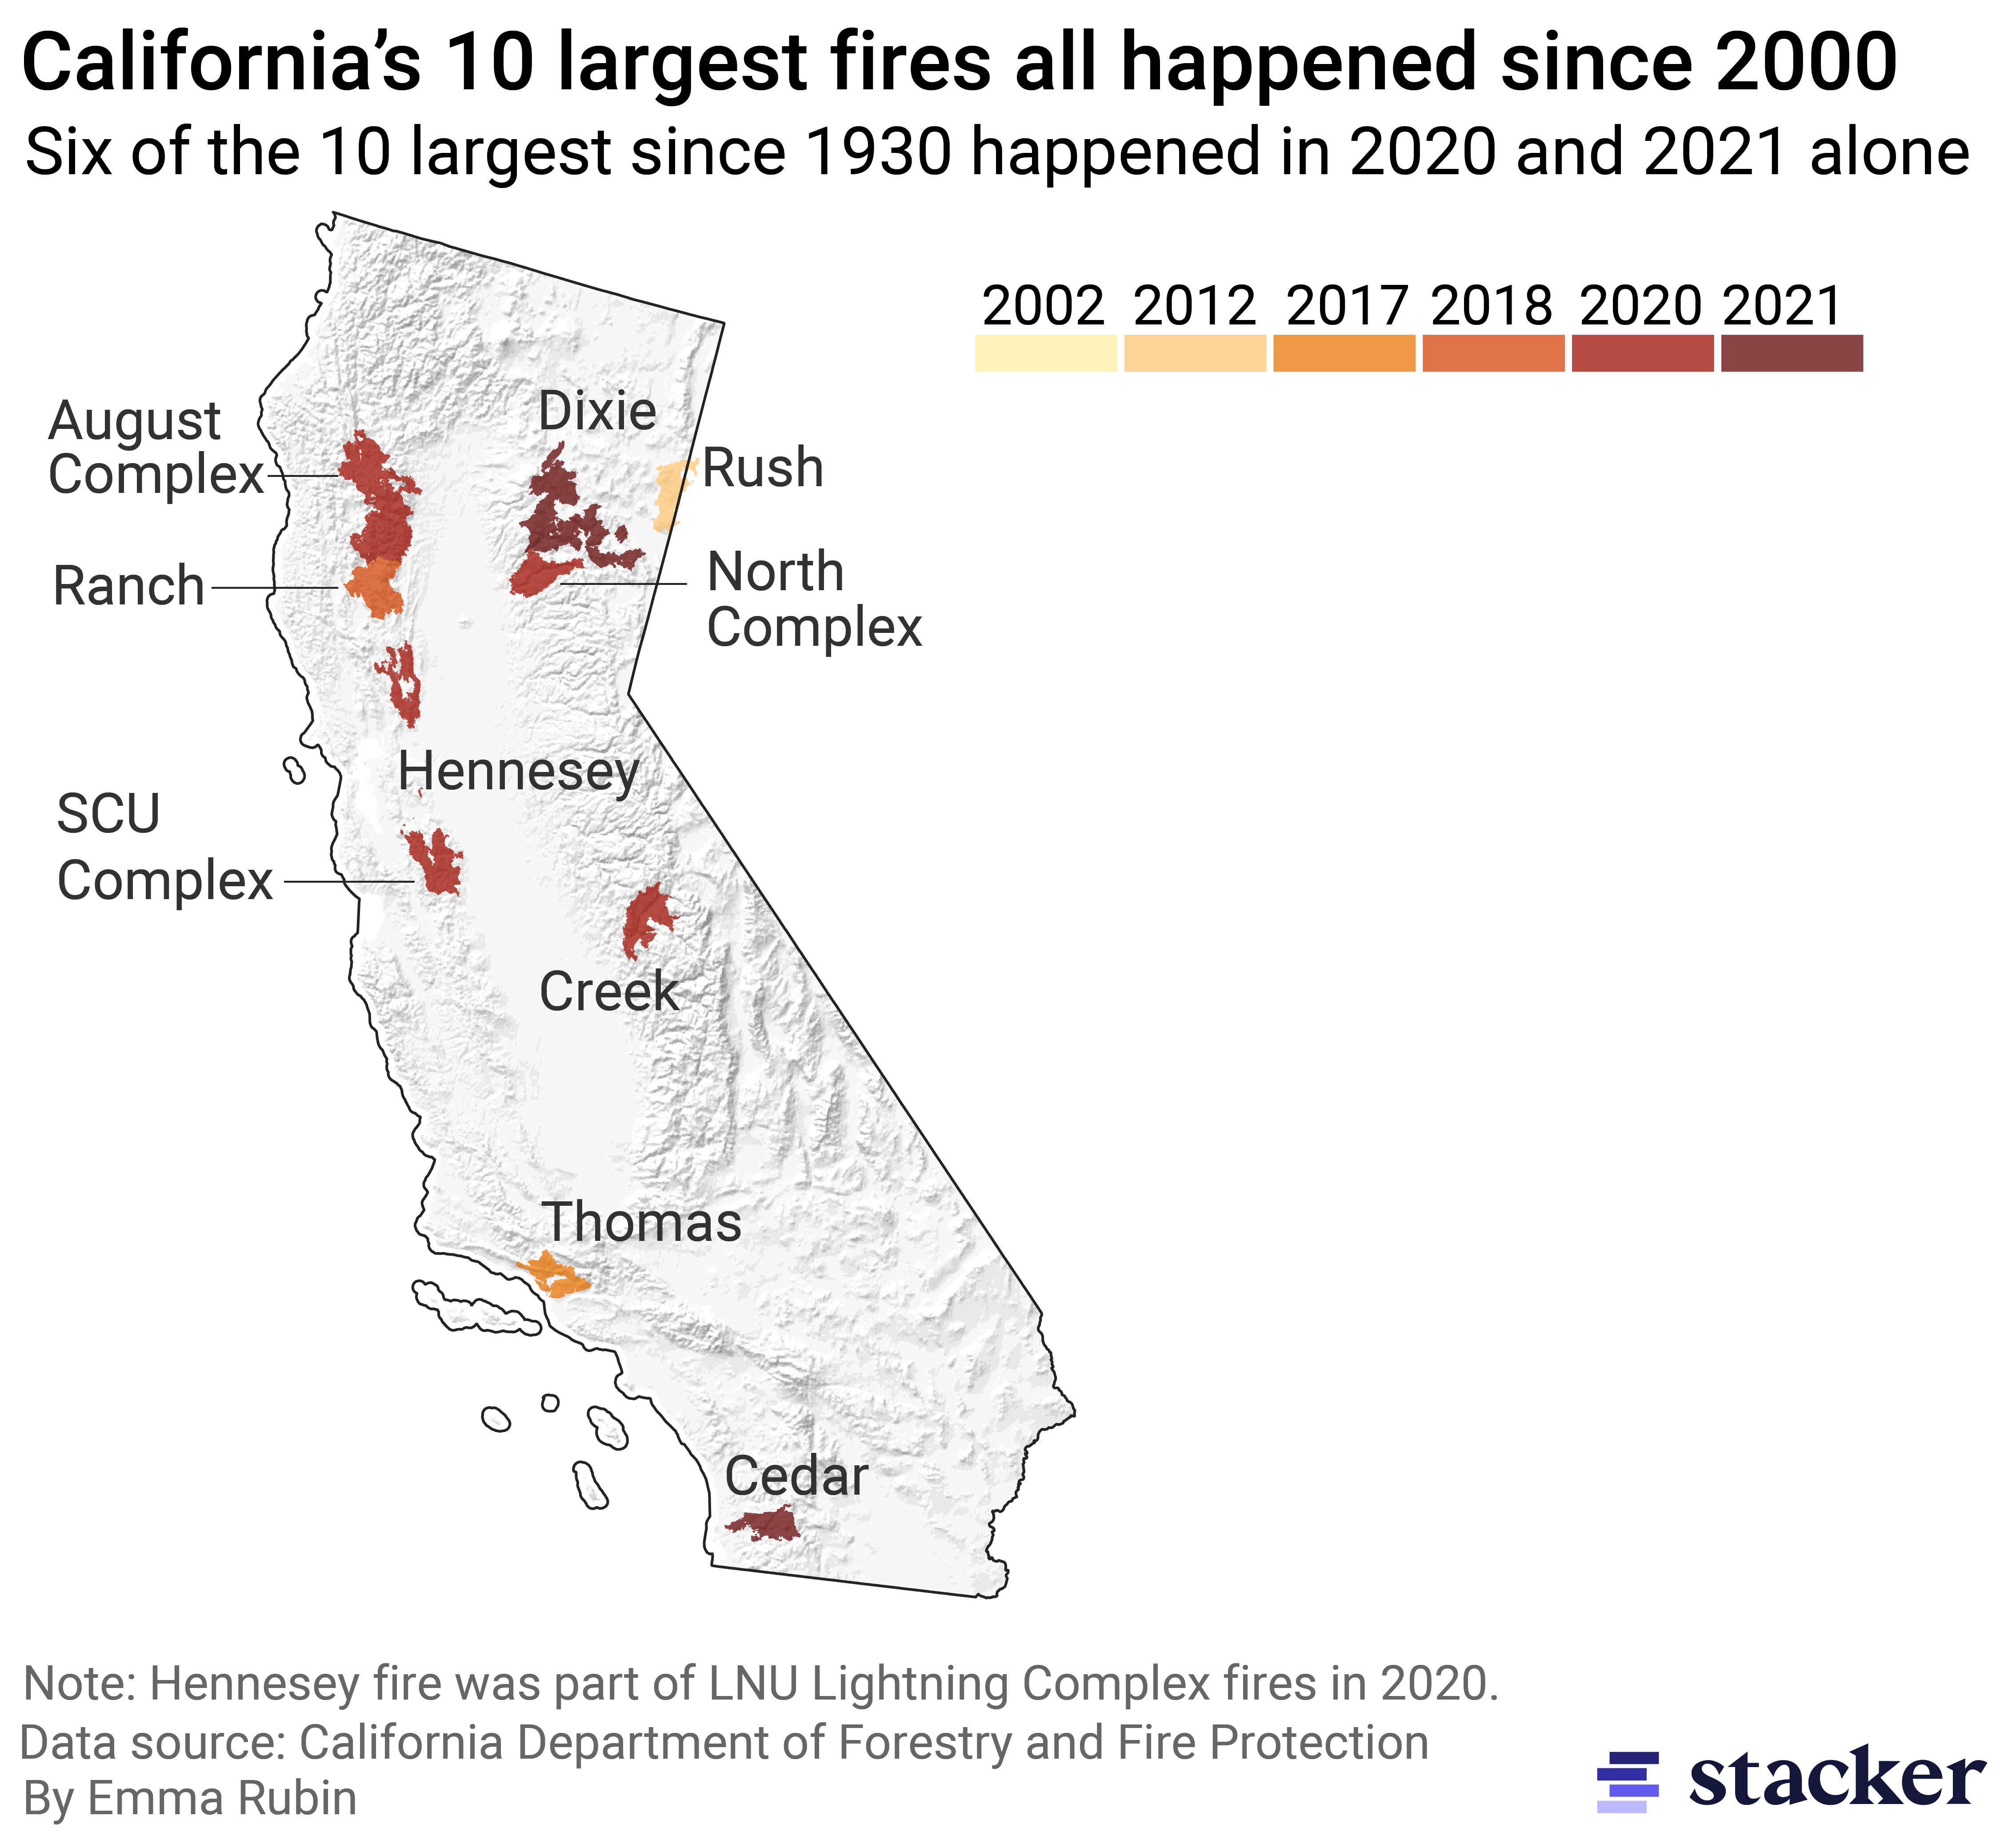 Map showing the 10 largest fires in California since 1930 have all happened since 2002. Six happened in 2020 and 2021 alone.